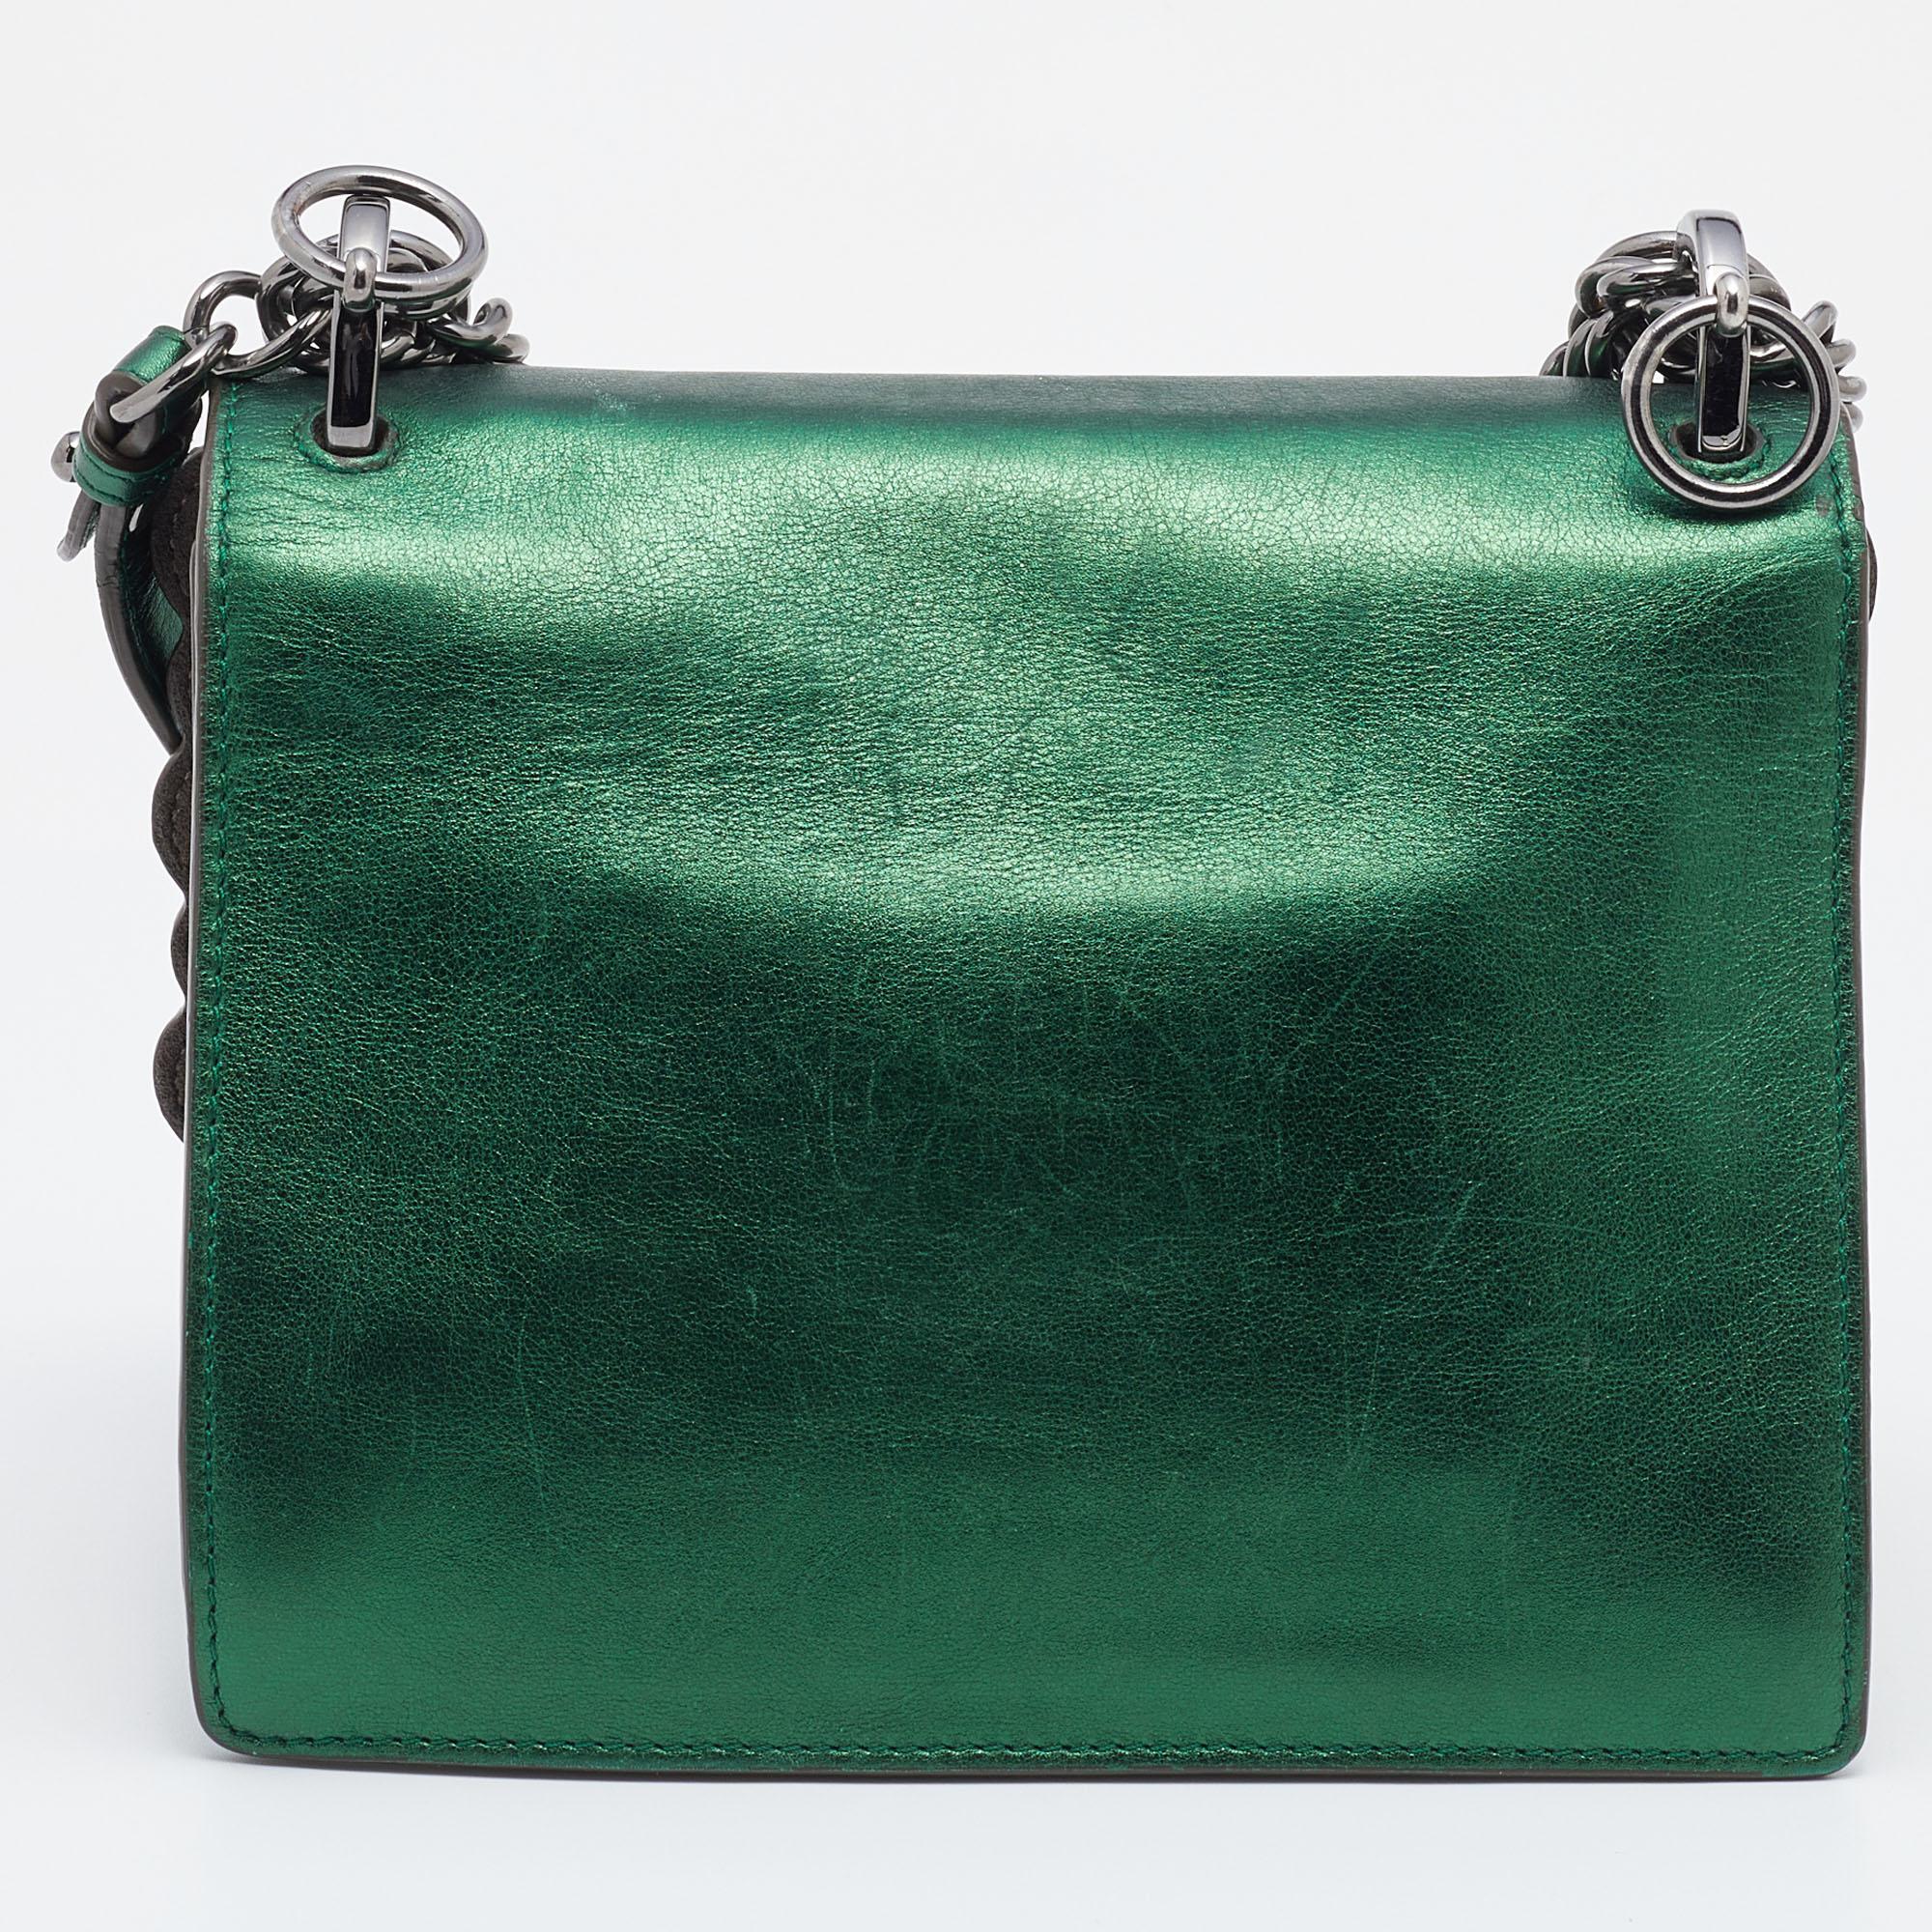 From the Resort 2017 collection, the Fendi Kan I bag depicts fun style and alluring appeal. This metallic green creation is a true piece of art with its striking details and faultless craftsmanship. Created from leather, its front scalloped trim is